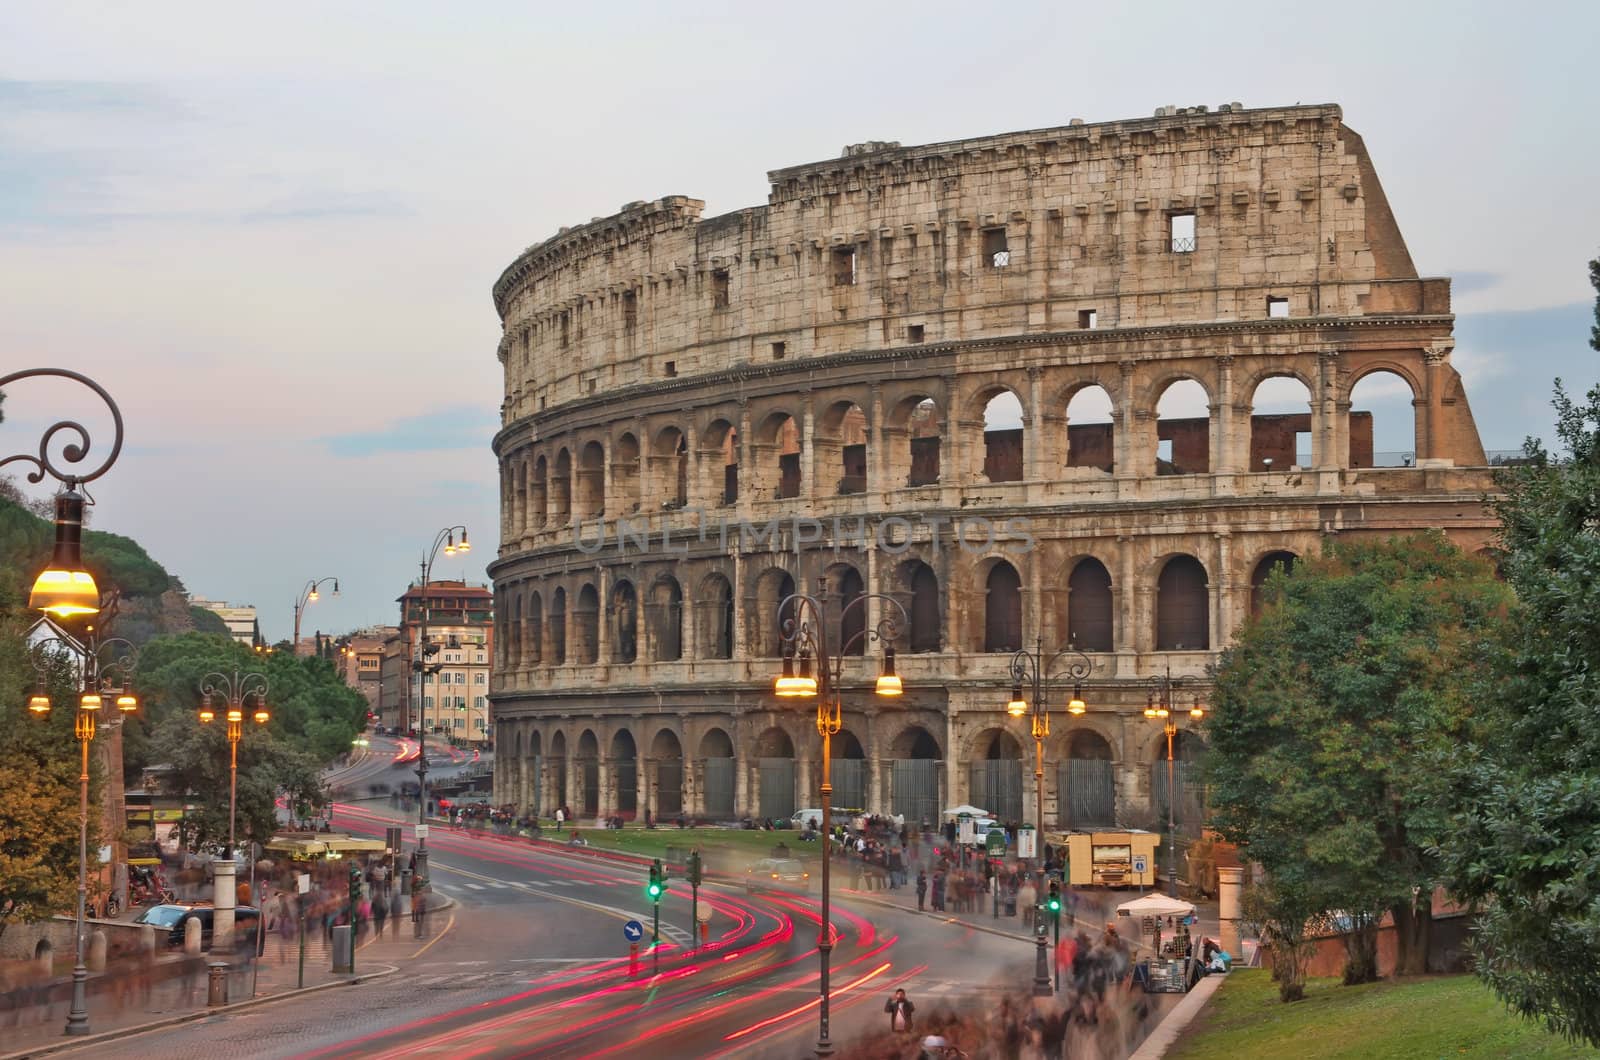 Evening view of Colosseum in Rome